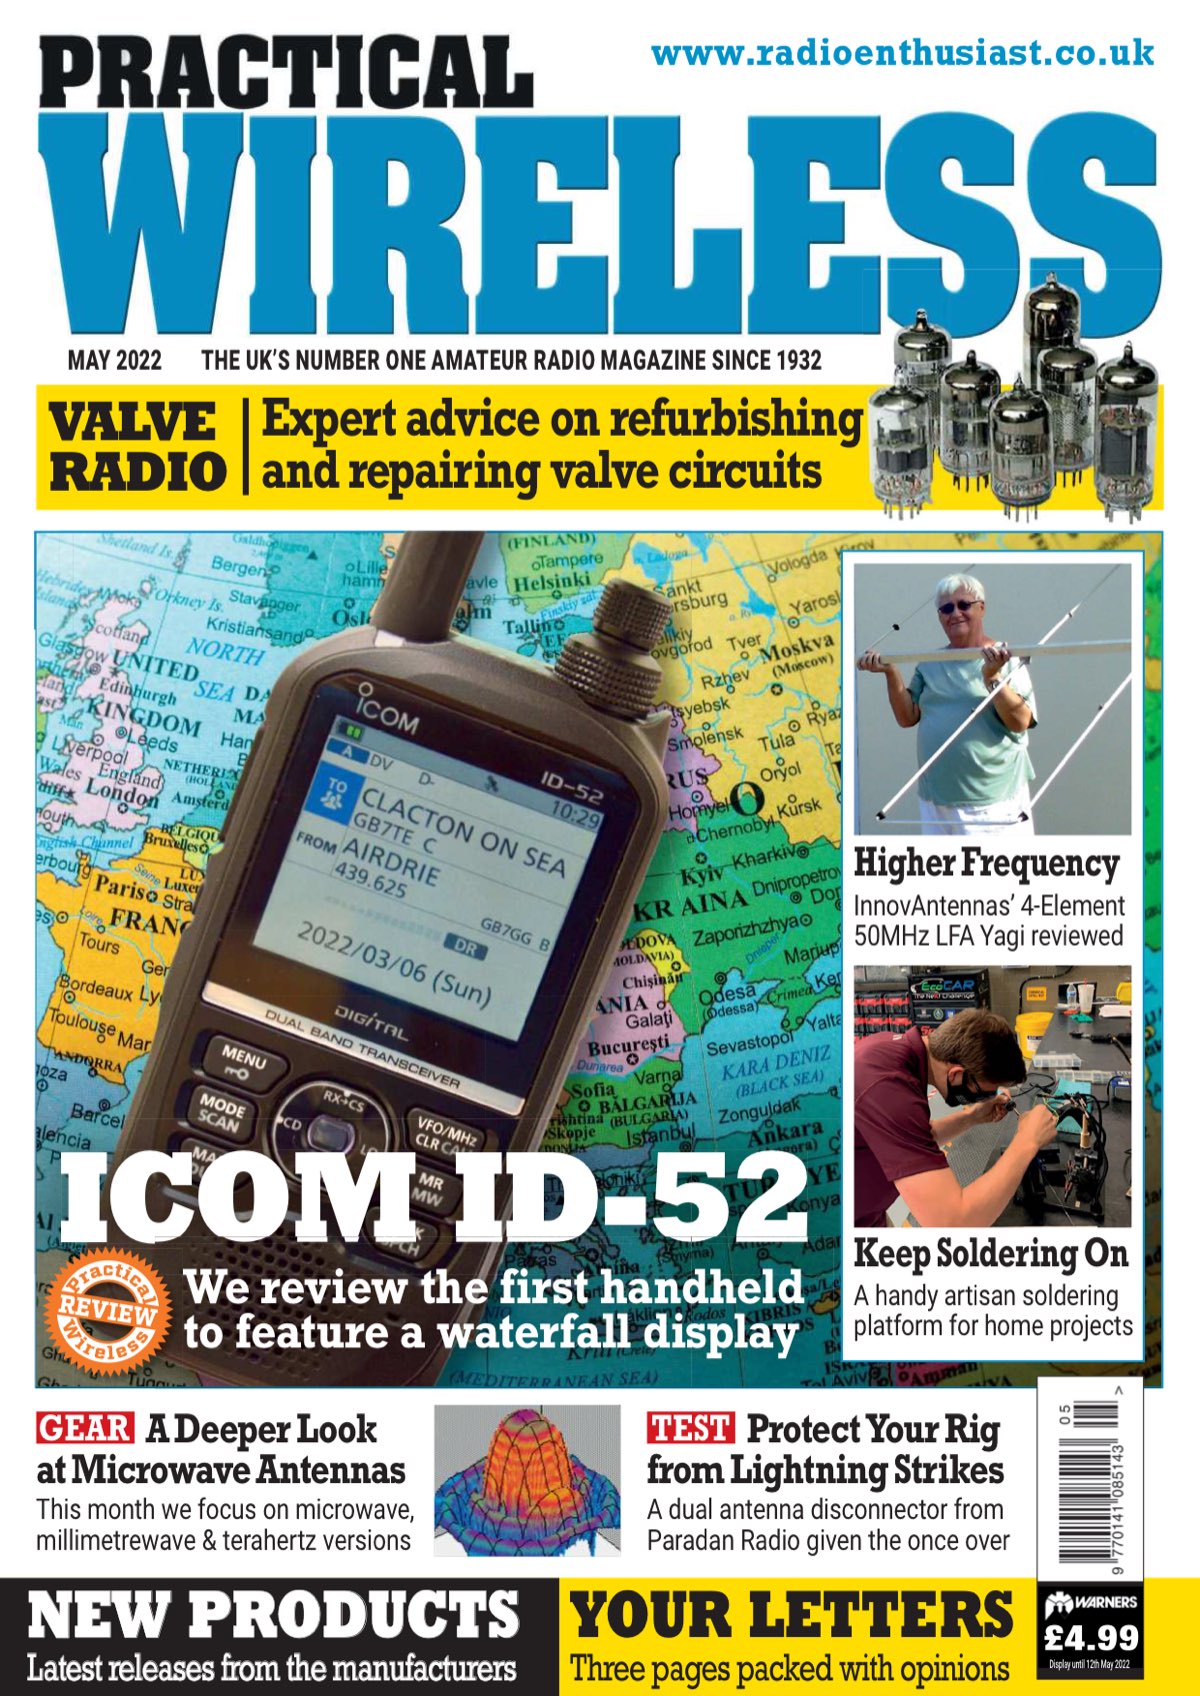 Practical Wireless - Vol. 98 No. 05 May 2022